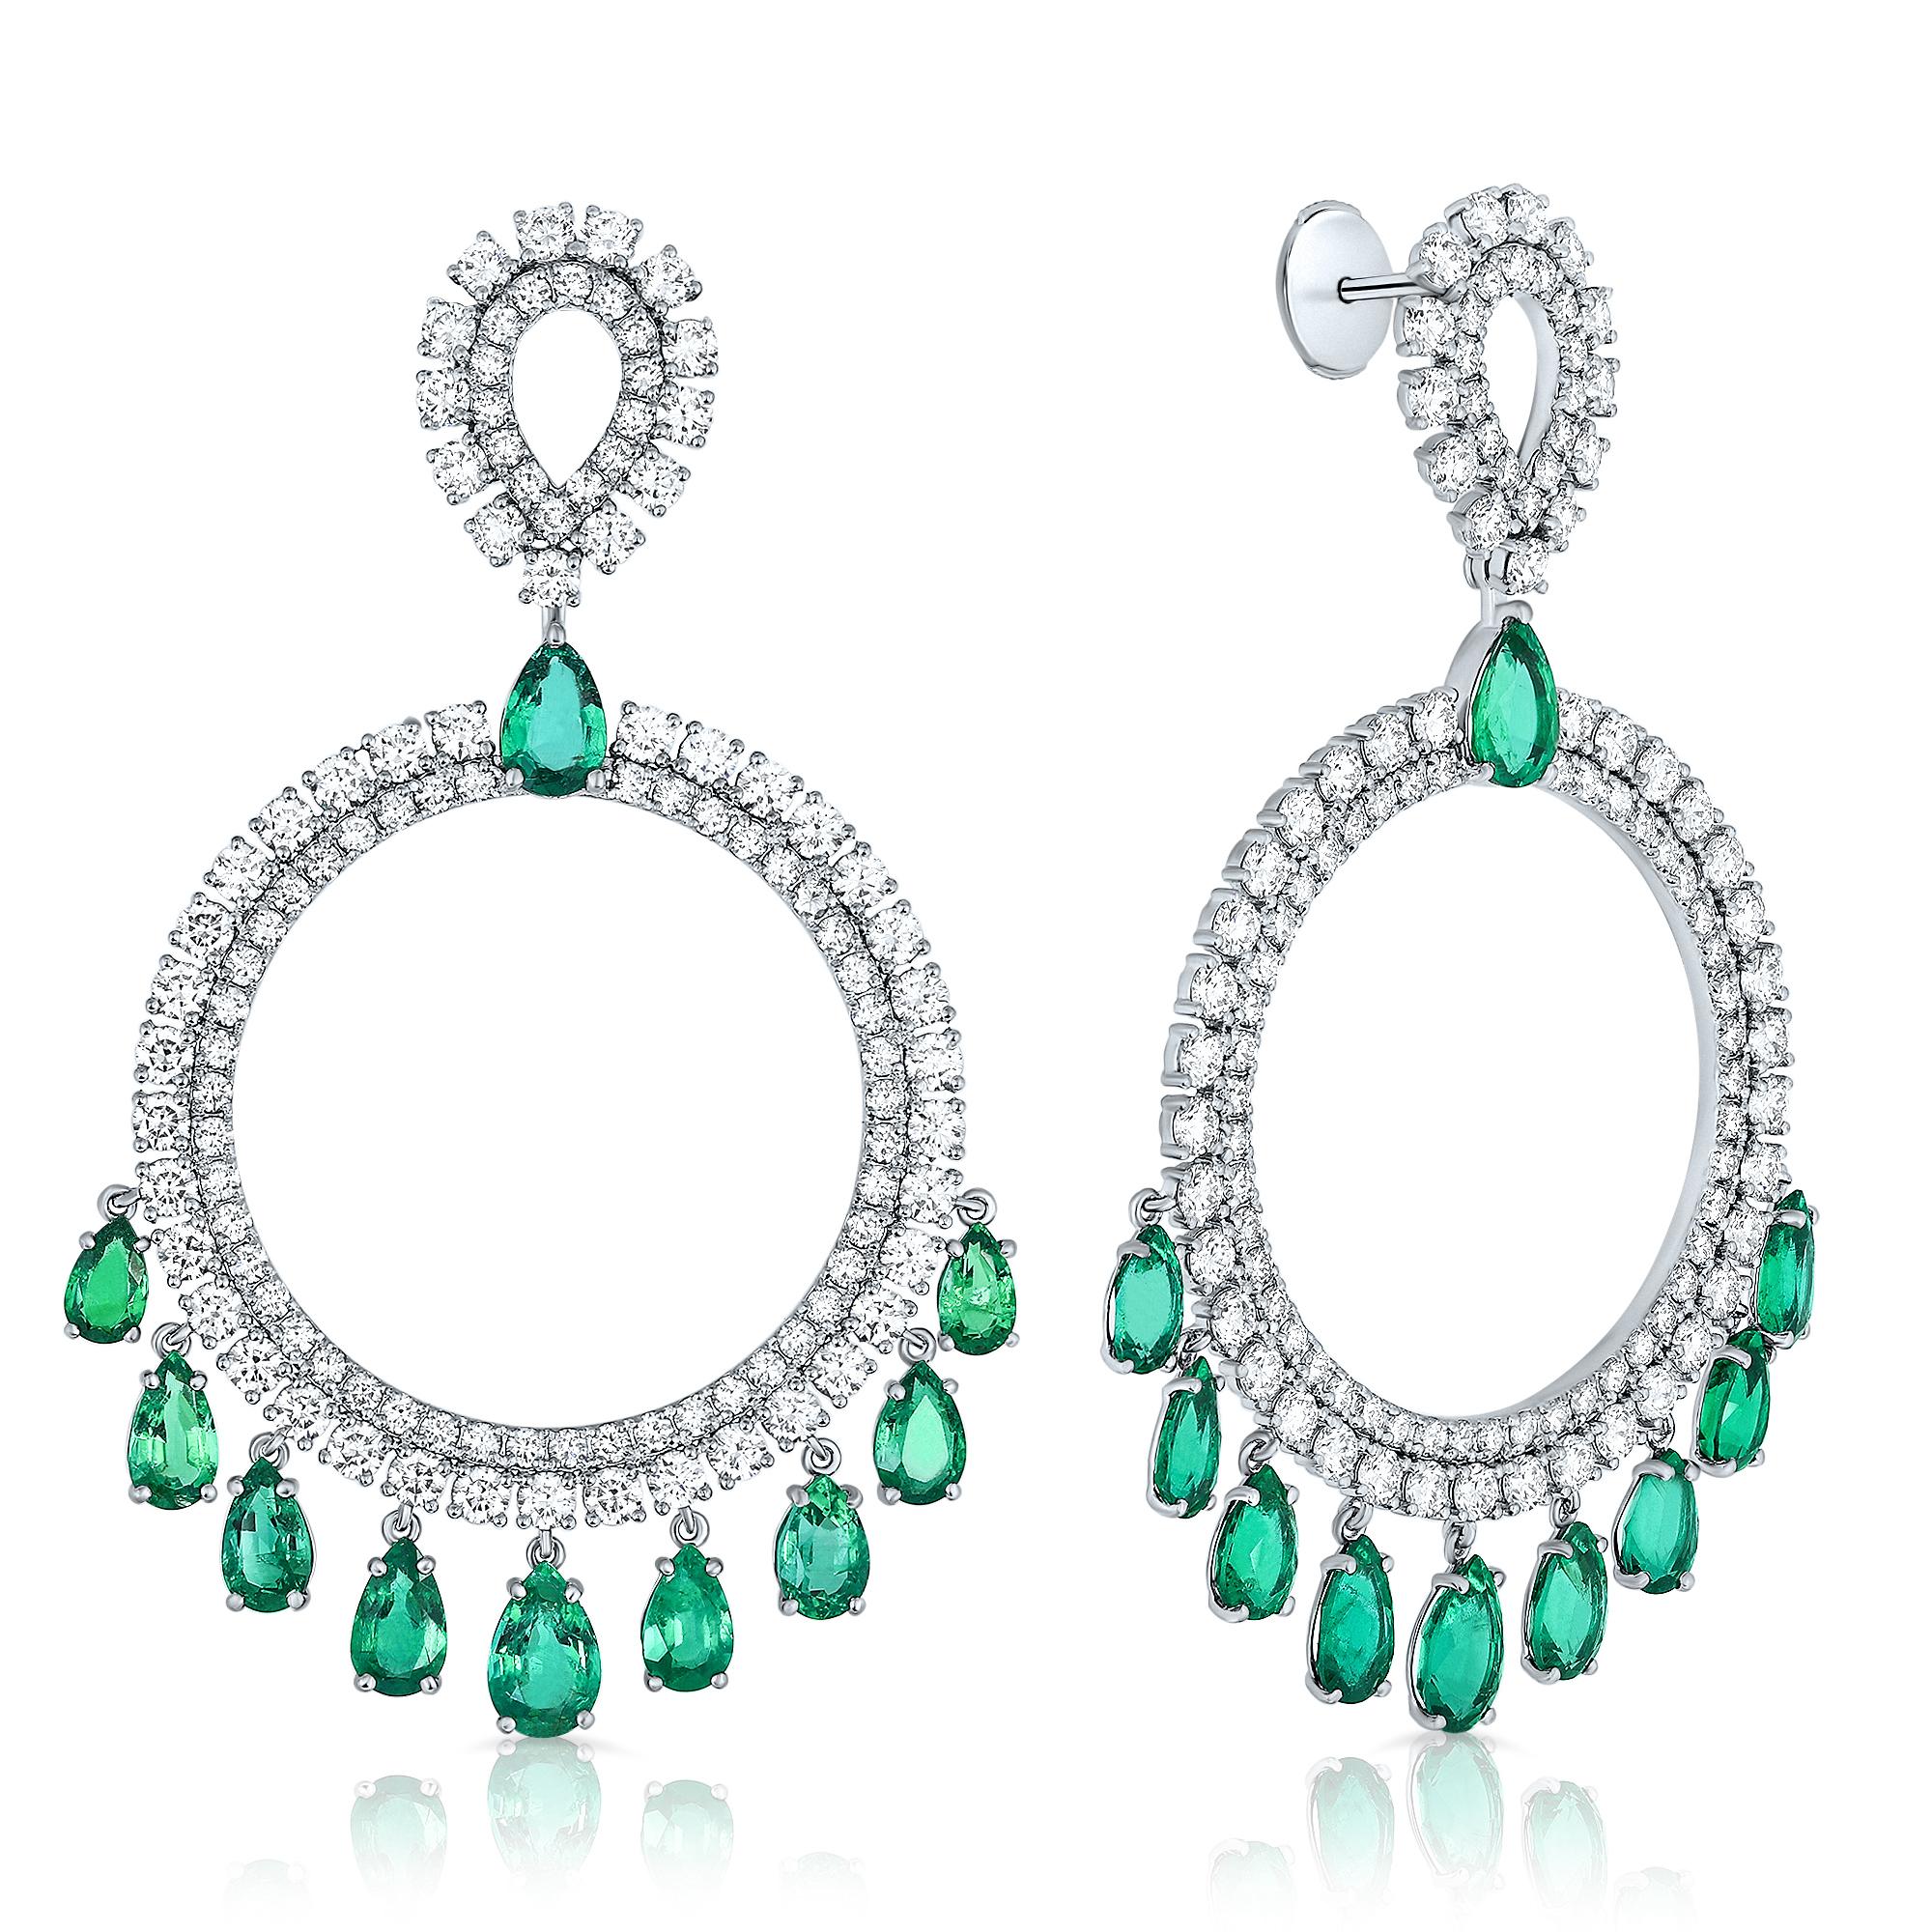 Introducing a breathtaking matched pair of 18K White Gold, Emerald, and Diamond Circular Drop Earrings. These exquisite chandelier drop earrings feature pear-shaped emerald stones totaling 9.63 carats and are accented by 216 round brilliant-cut